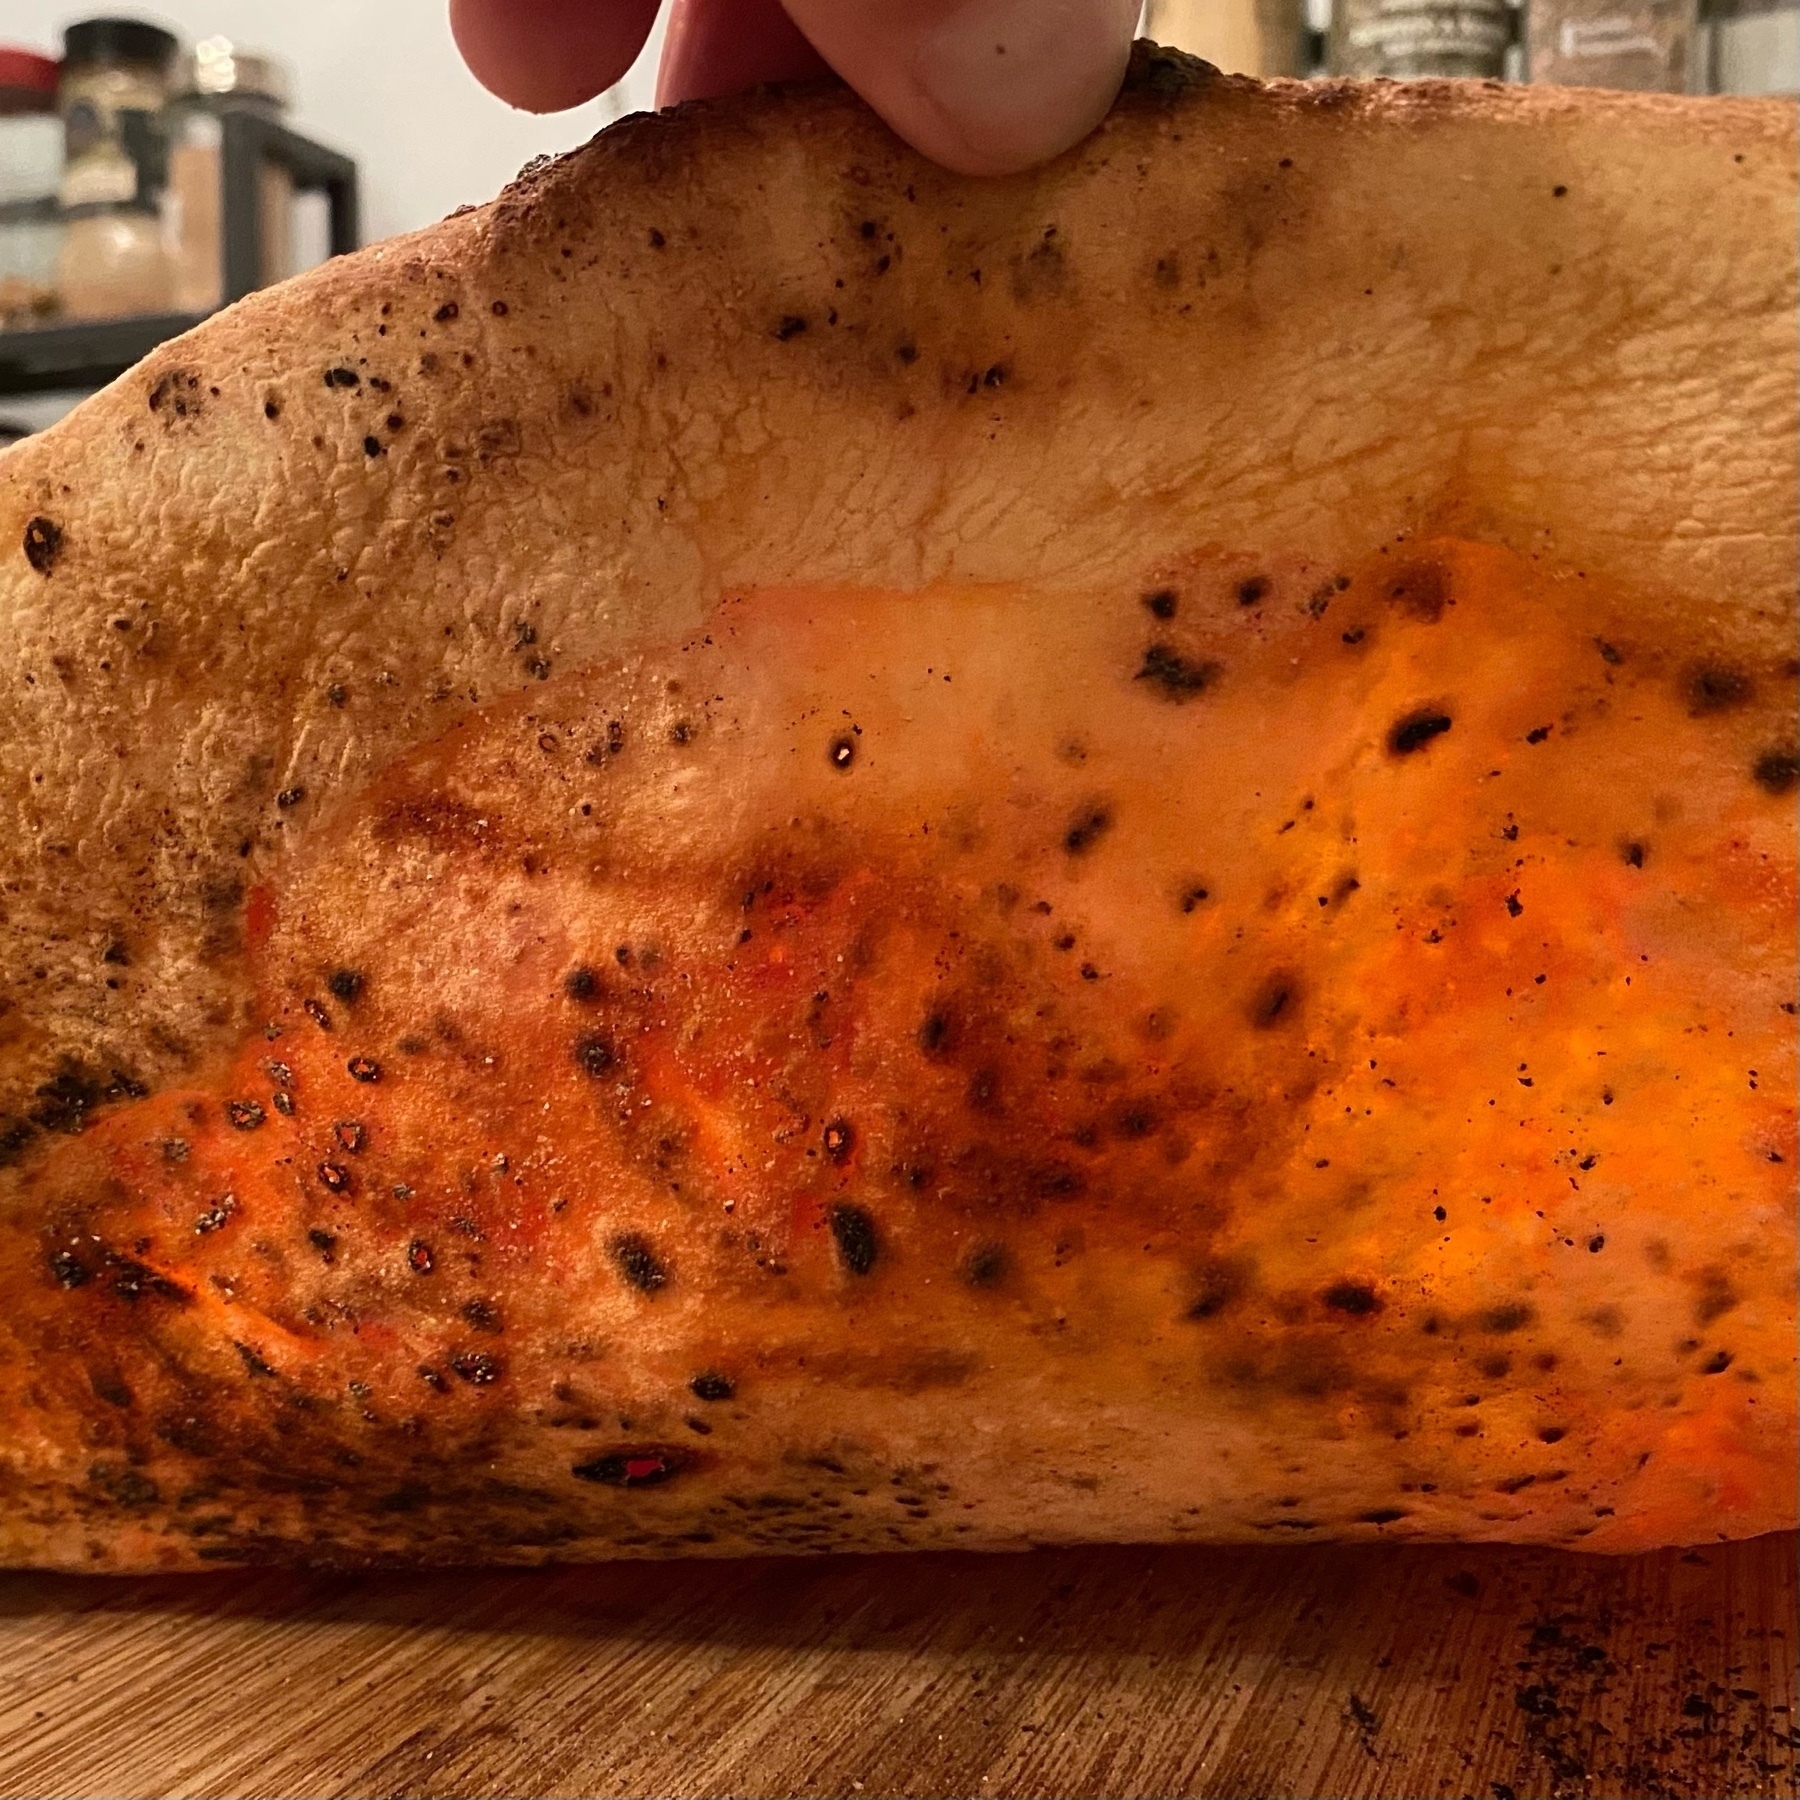 picture of a bottom of a cooked pizza with light shining through a thin crust